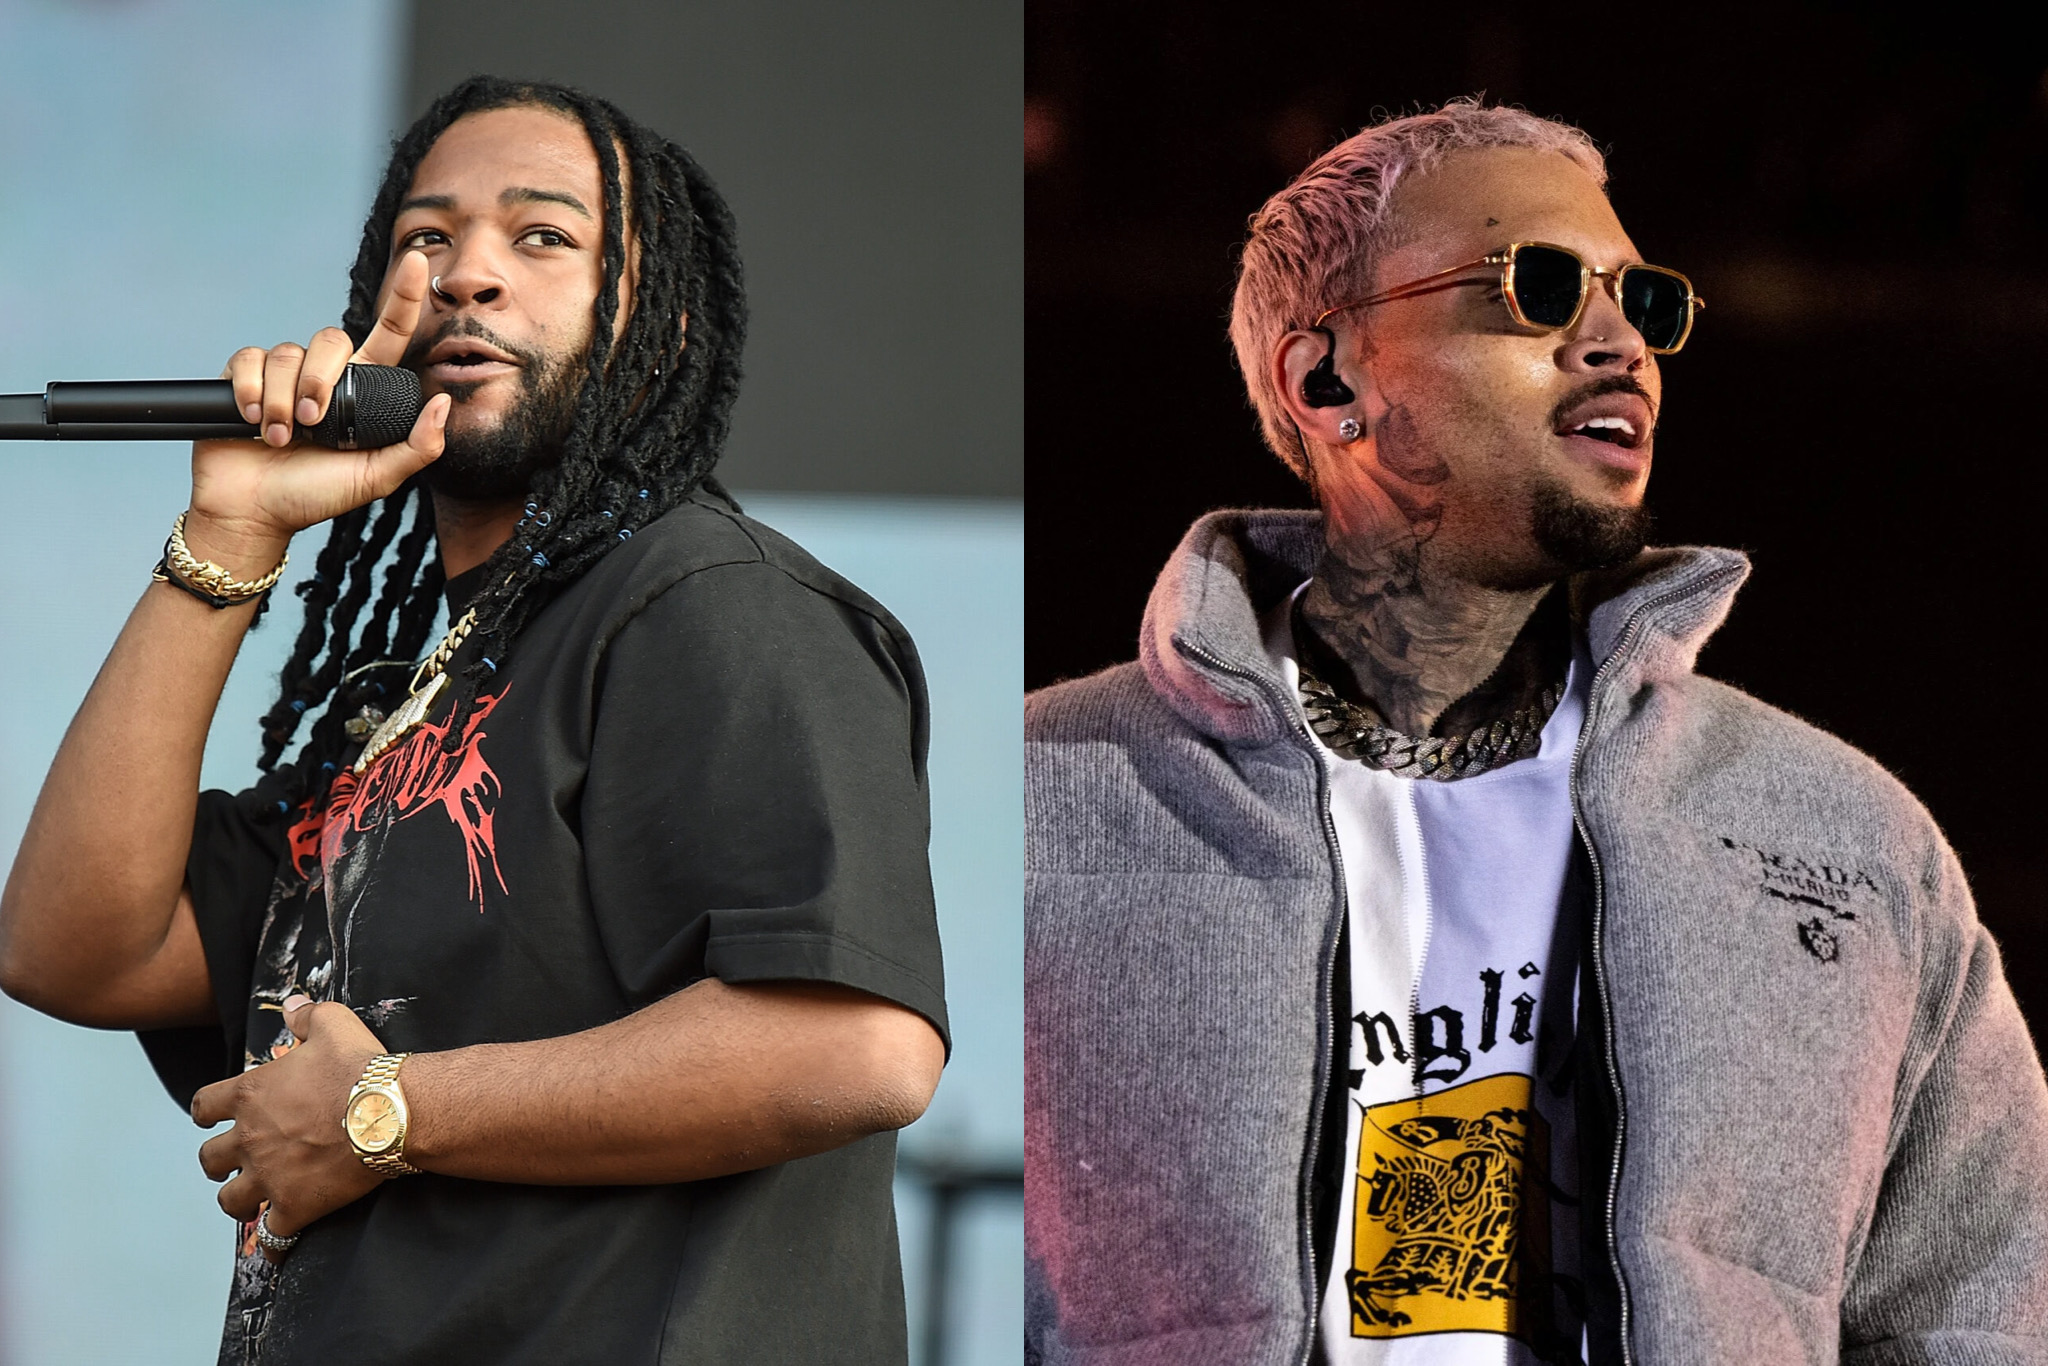 PARTYNEXTDOOR fires shots at Chris Brown, Jeremih and Bryson Tiller over new music video with his ex, Chris Brown responds